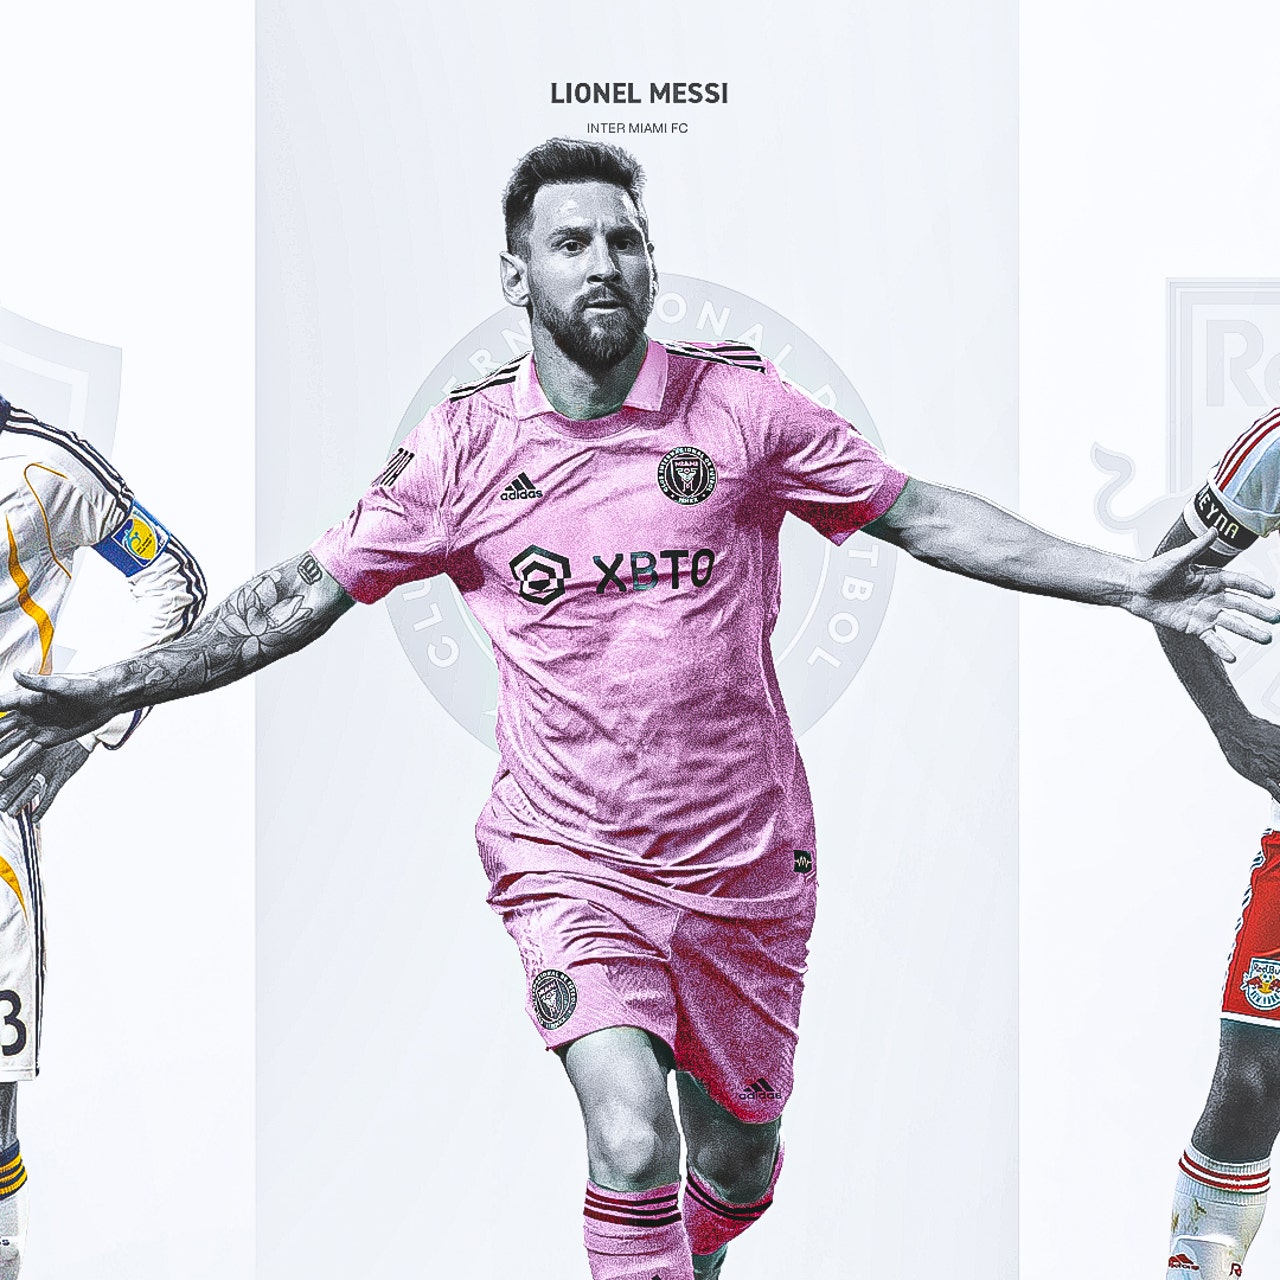 A History of the Superstars Who Came to MLS Before Lionel Messi